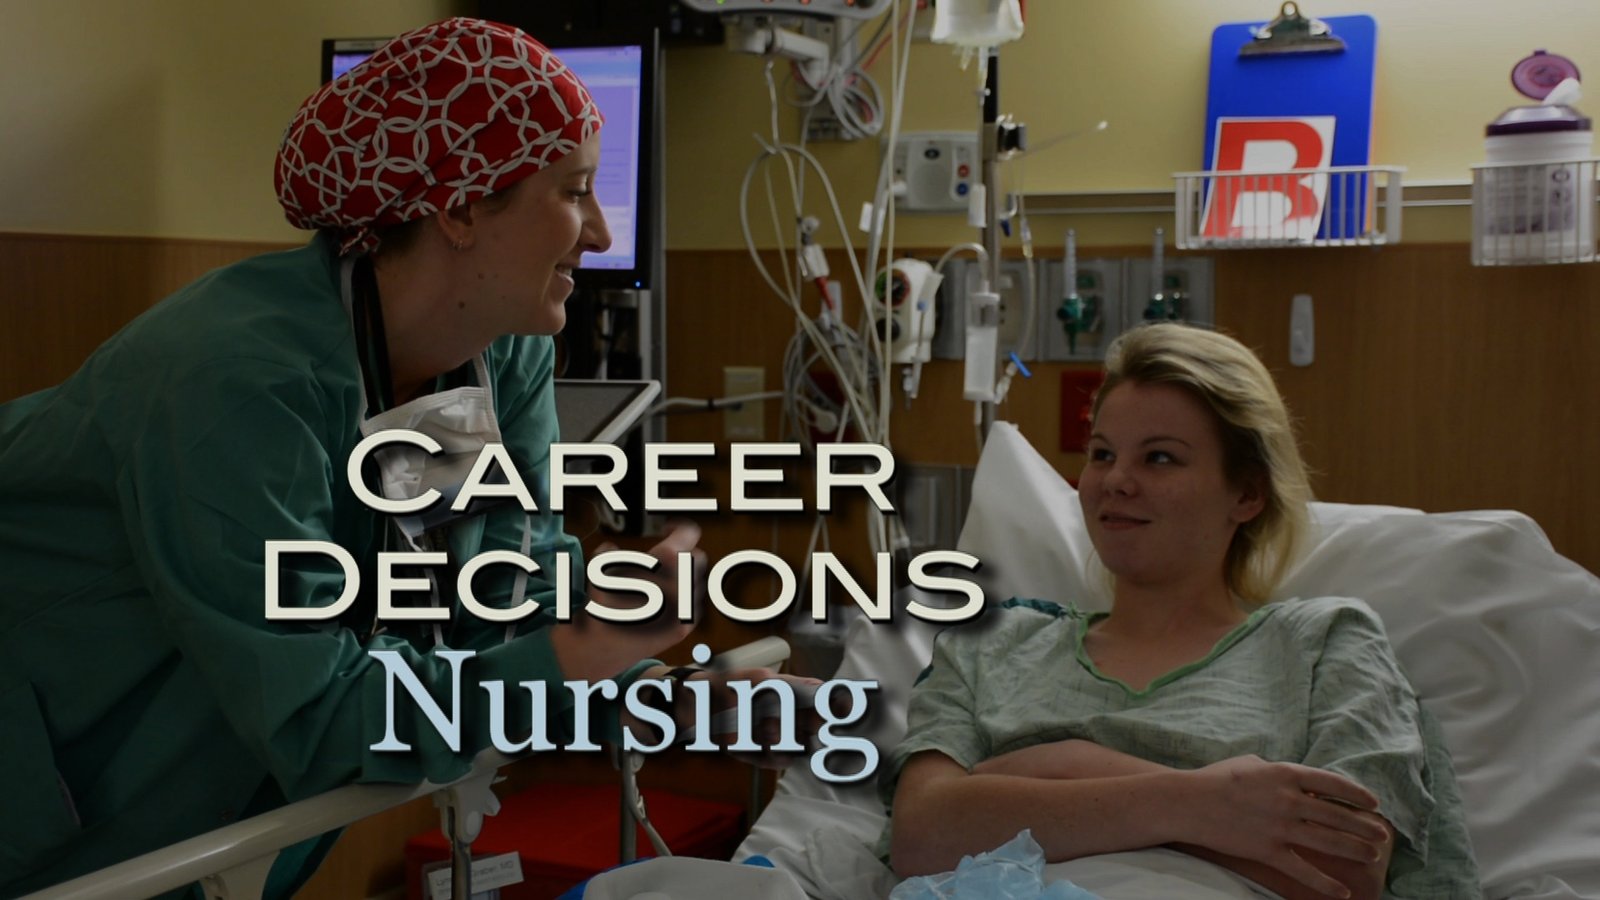 Career Decisions: Nursing - An Invaluable Guide to Prospective Nursing Students